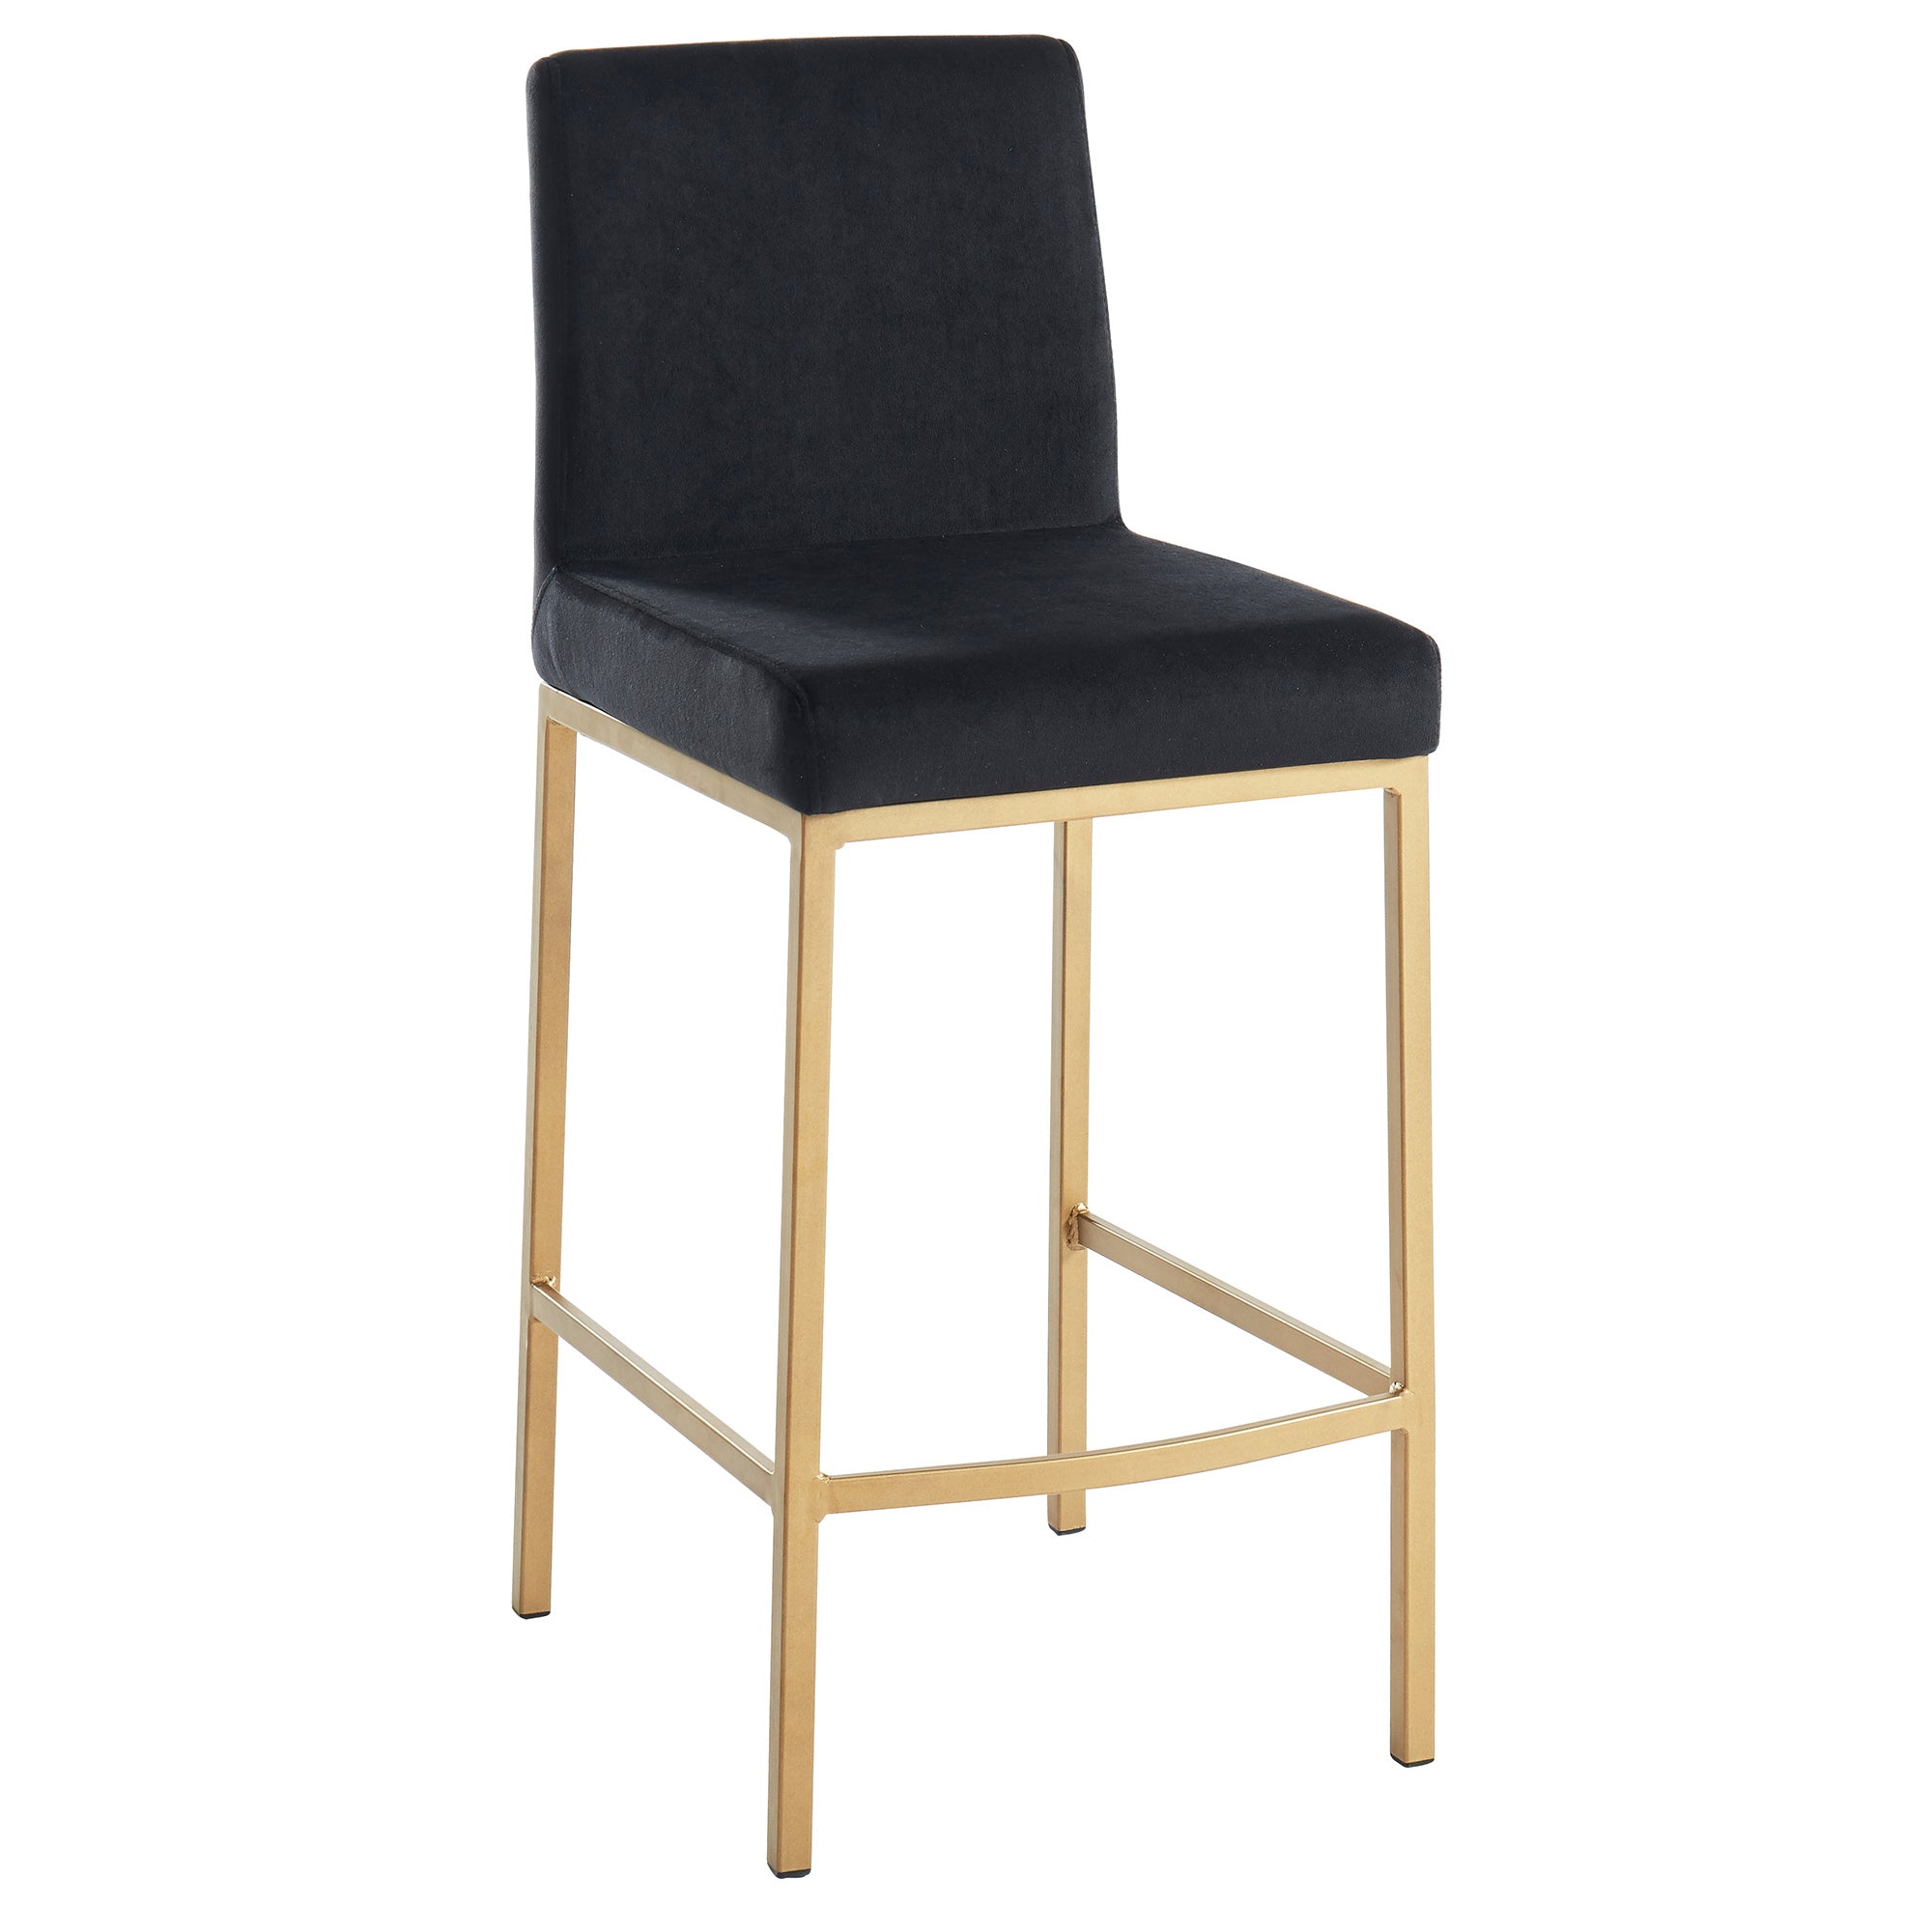 Diego Counter Stool - Black/Gold Legs